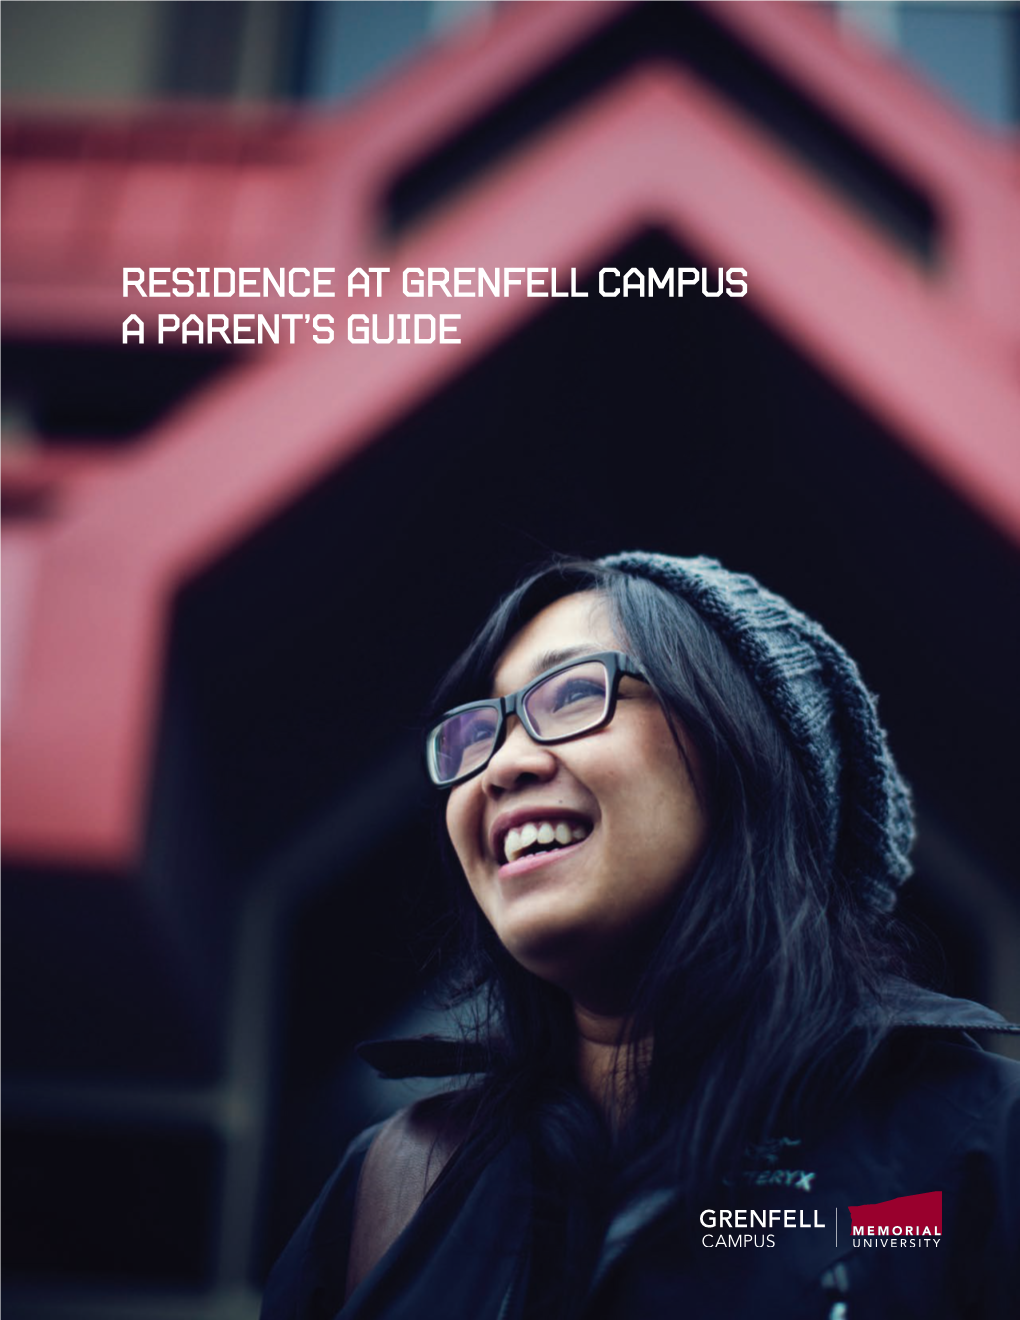 Residence at Grenfell Campus a Parent's Guide